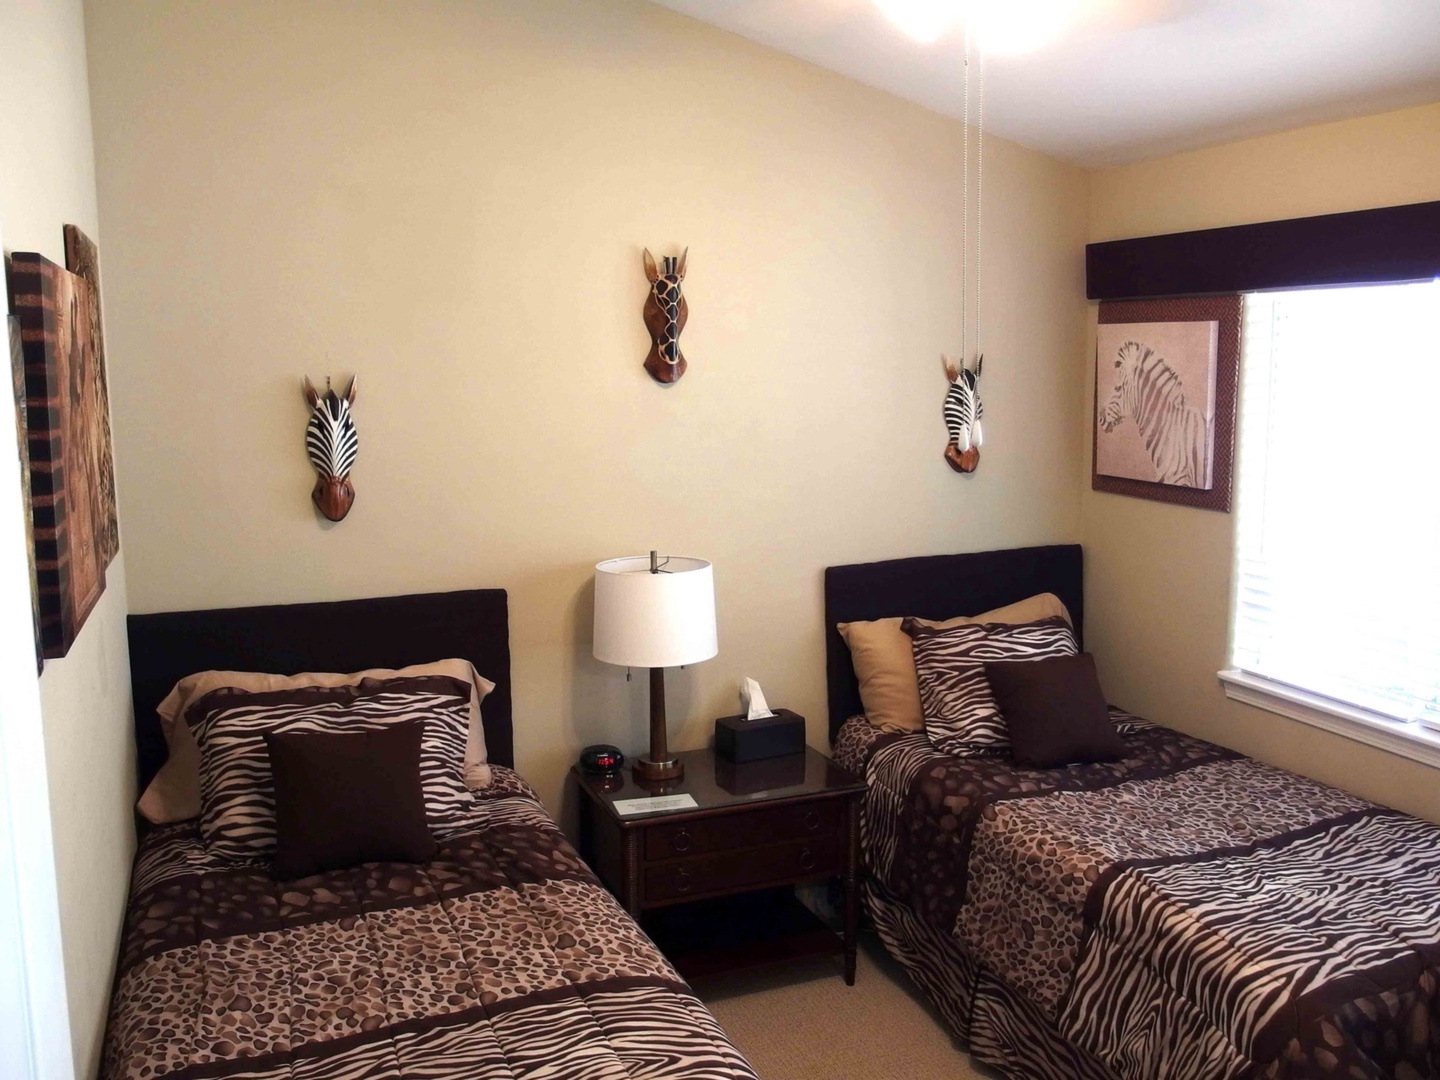 Kailua Kona Vacation Rentals, Hale Alaula - Ocean View - The third bedroom is comfortably furnished with two twin beds, an overhead fan, and a  32-inch Smart T.V. All televisions feature cable, including Netflix, for your enjoyment.